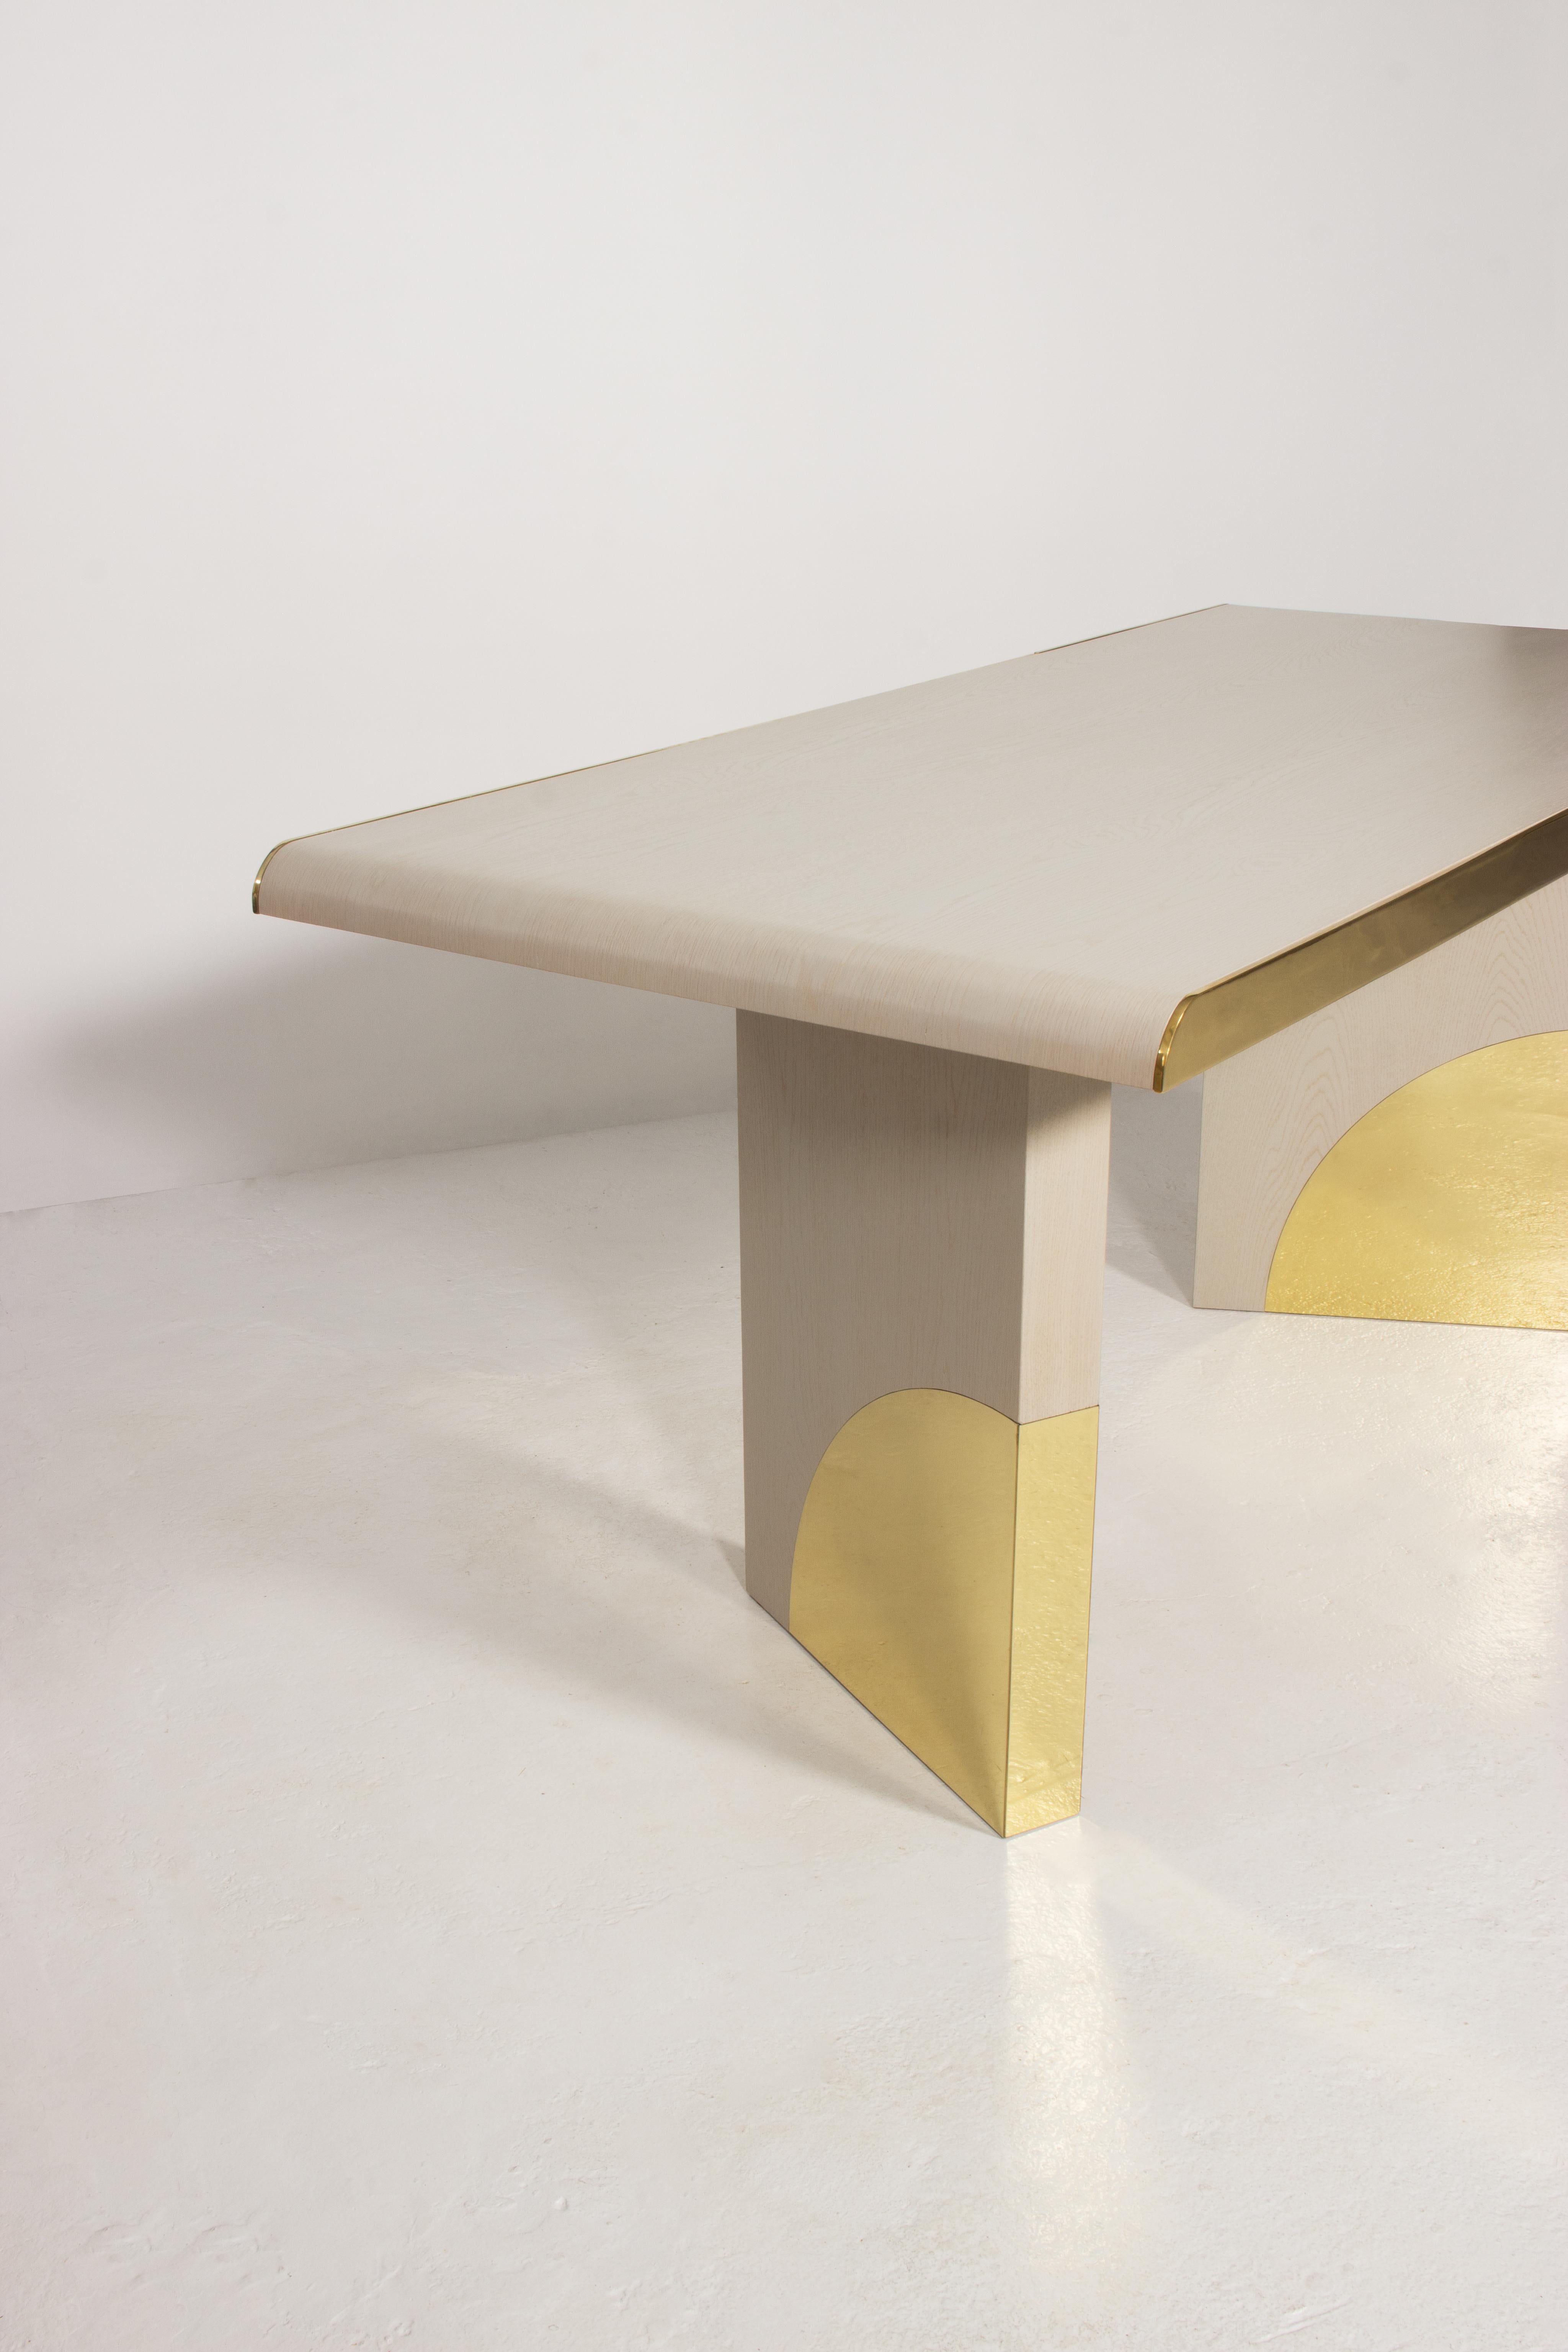 Contemporary Utopia Desk, Cream Oak and Polished Brass, InsidherLand by Joana Santos Barbosa For Sale